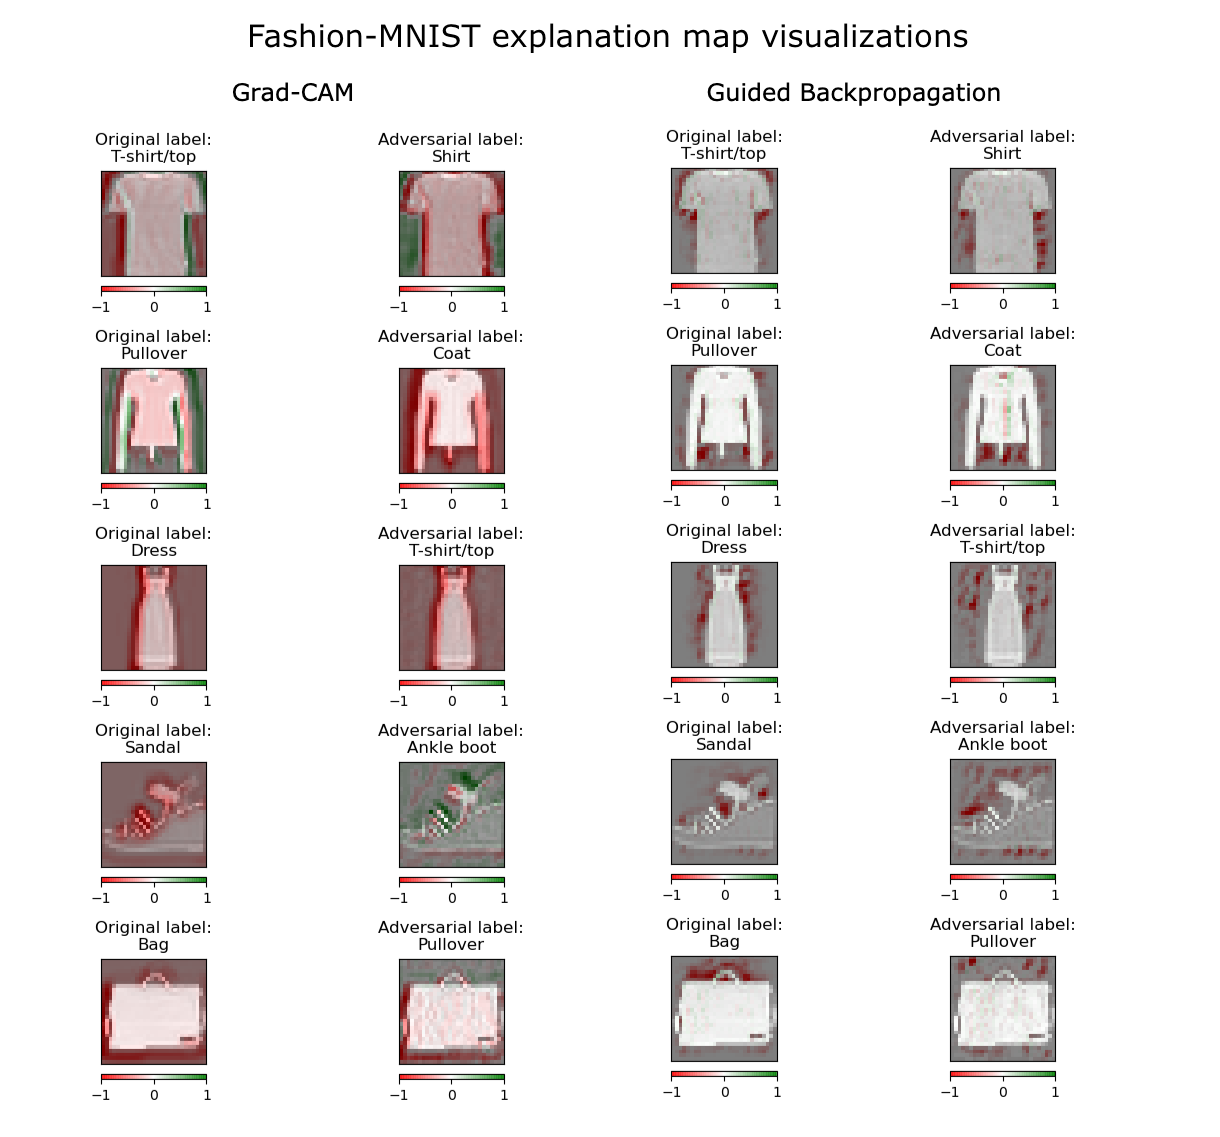 Visualization of initial original and adversarial explanation maps for different Fashion-MNIST categories. The Grad-CAM explanations are displayed on the right, and the Guided Backpropagation explanations on the left.